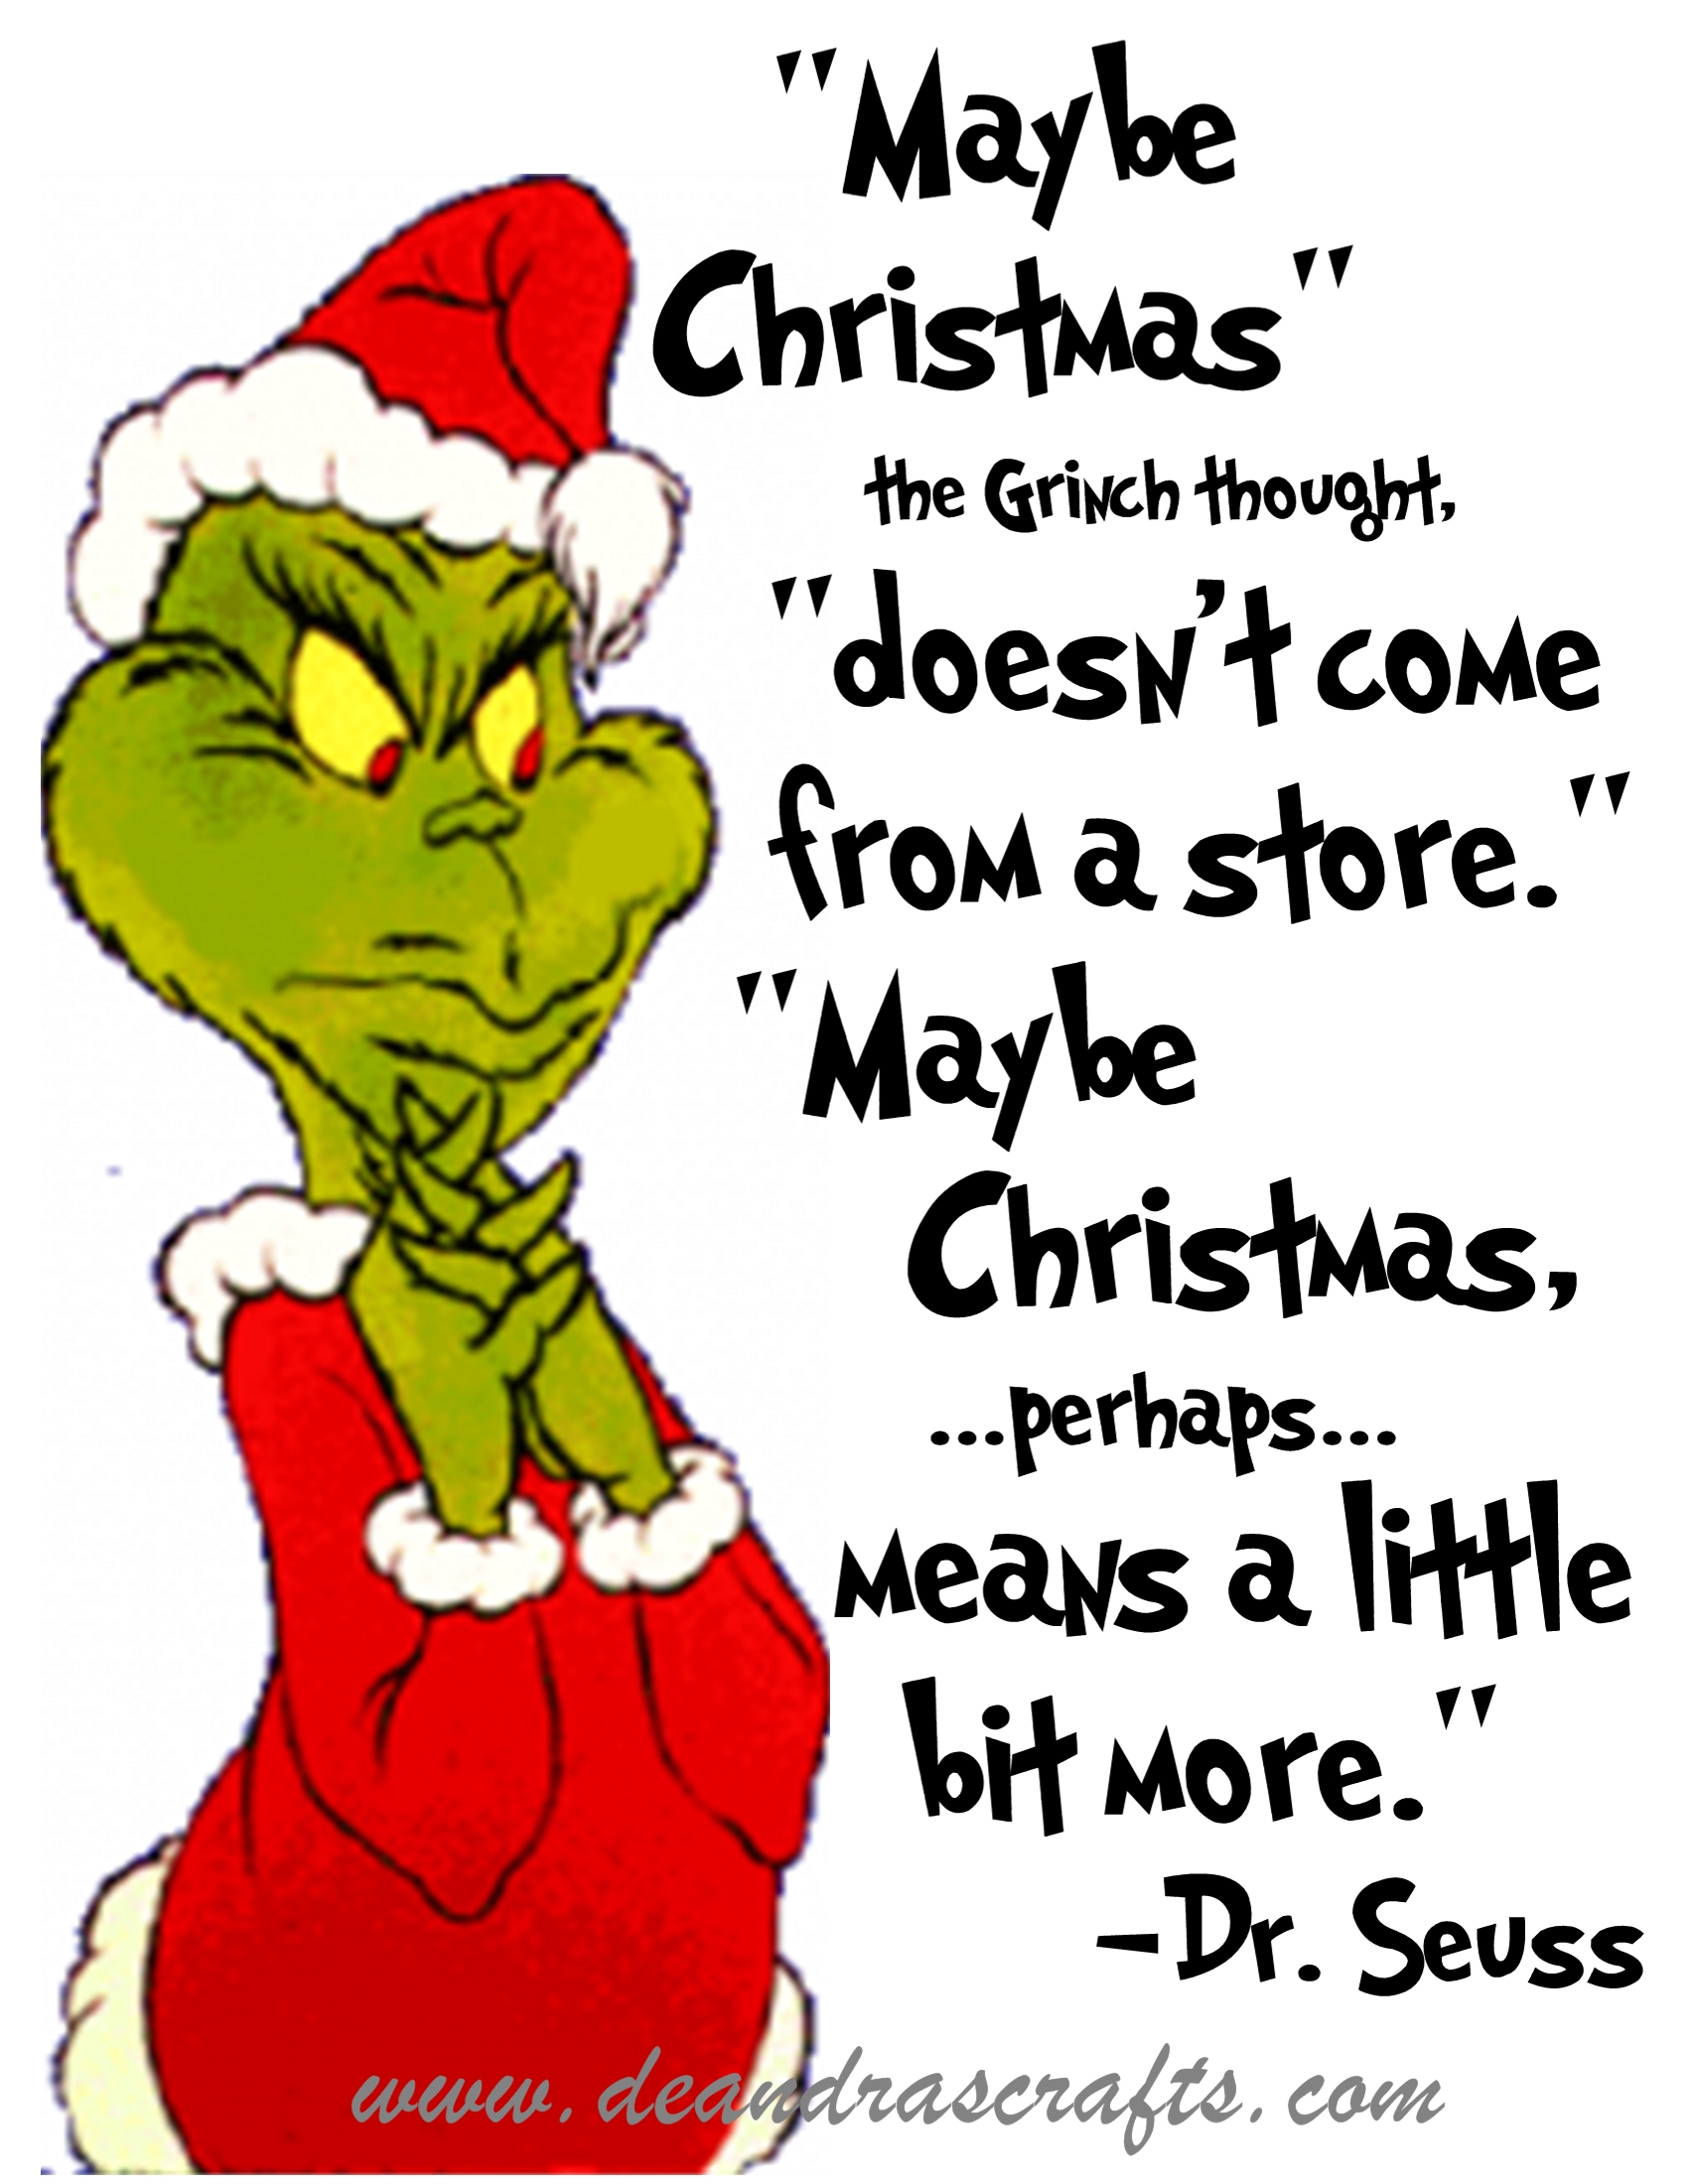 how the grinch stole christmas book quotes